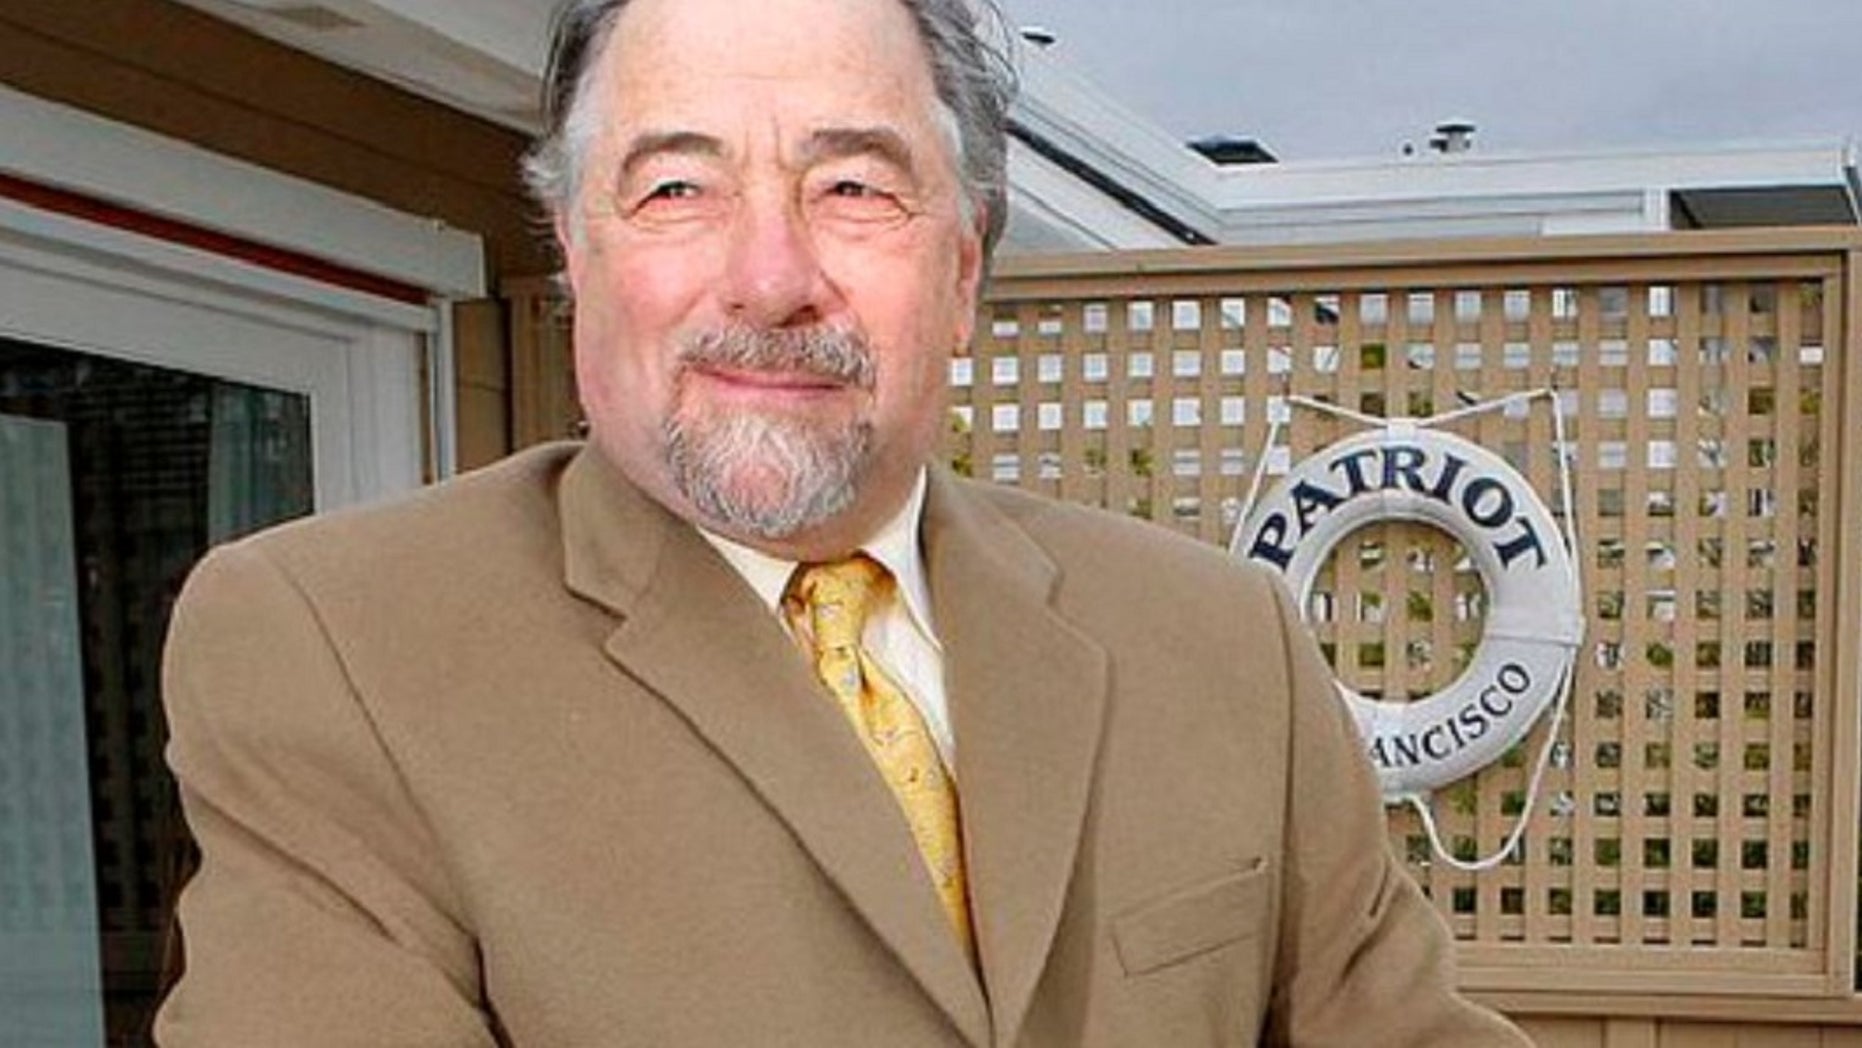 Michael Savage says he changed location after threatening email